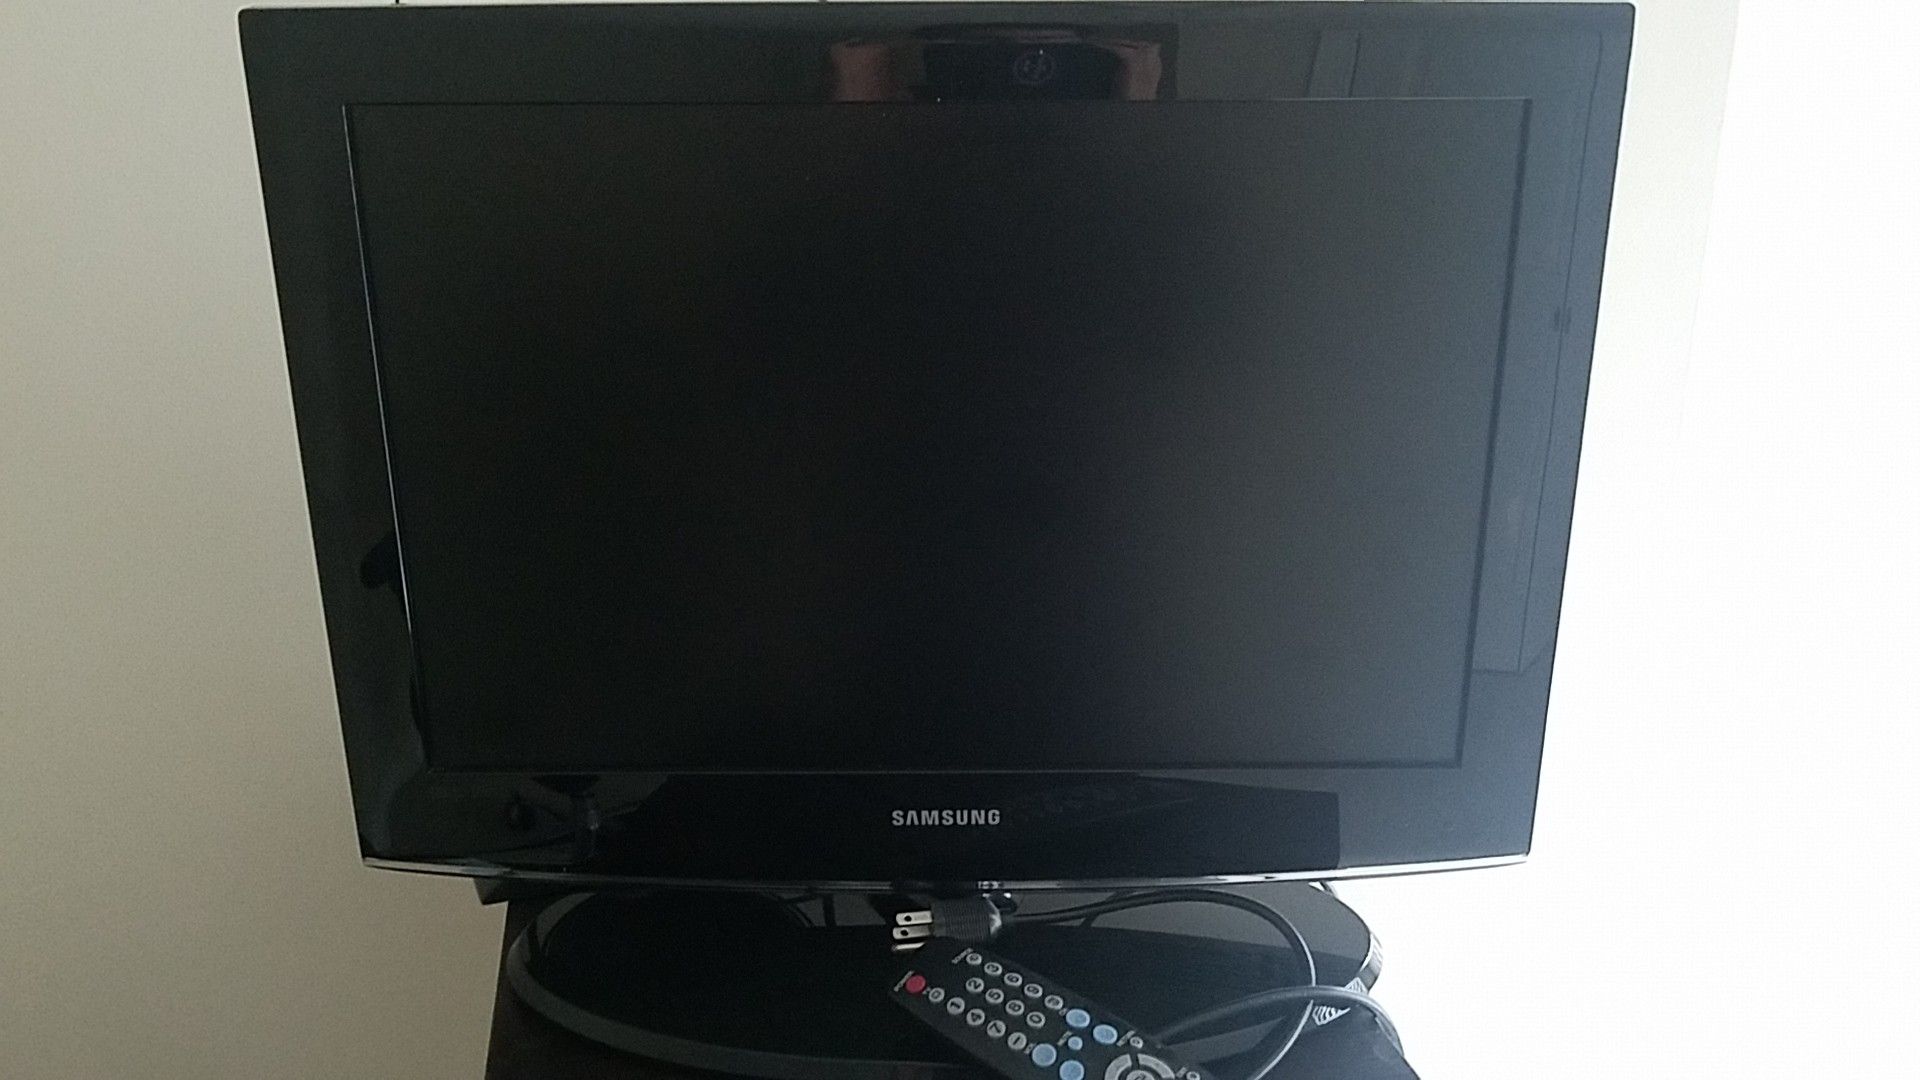 Samsung 22" TV with Remote